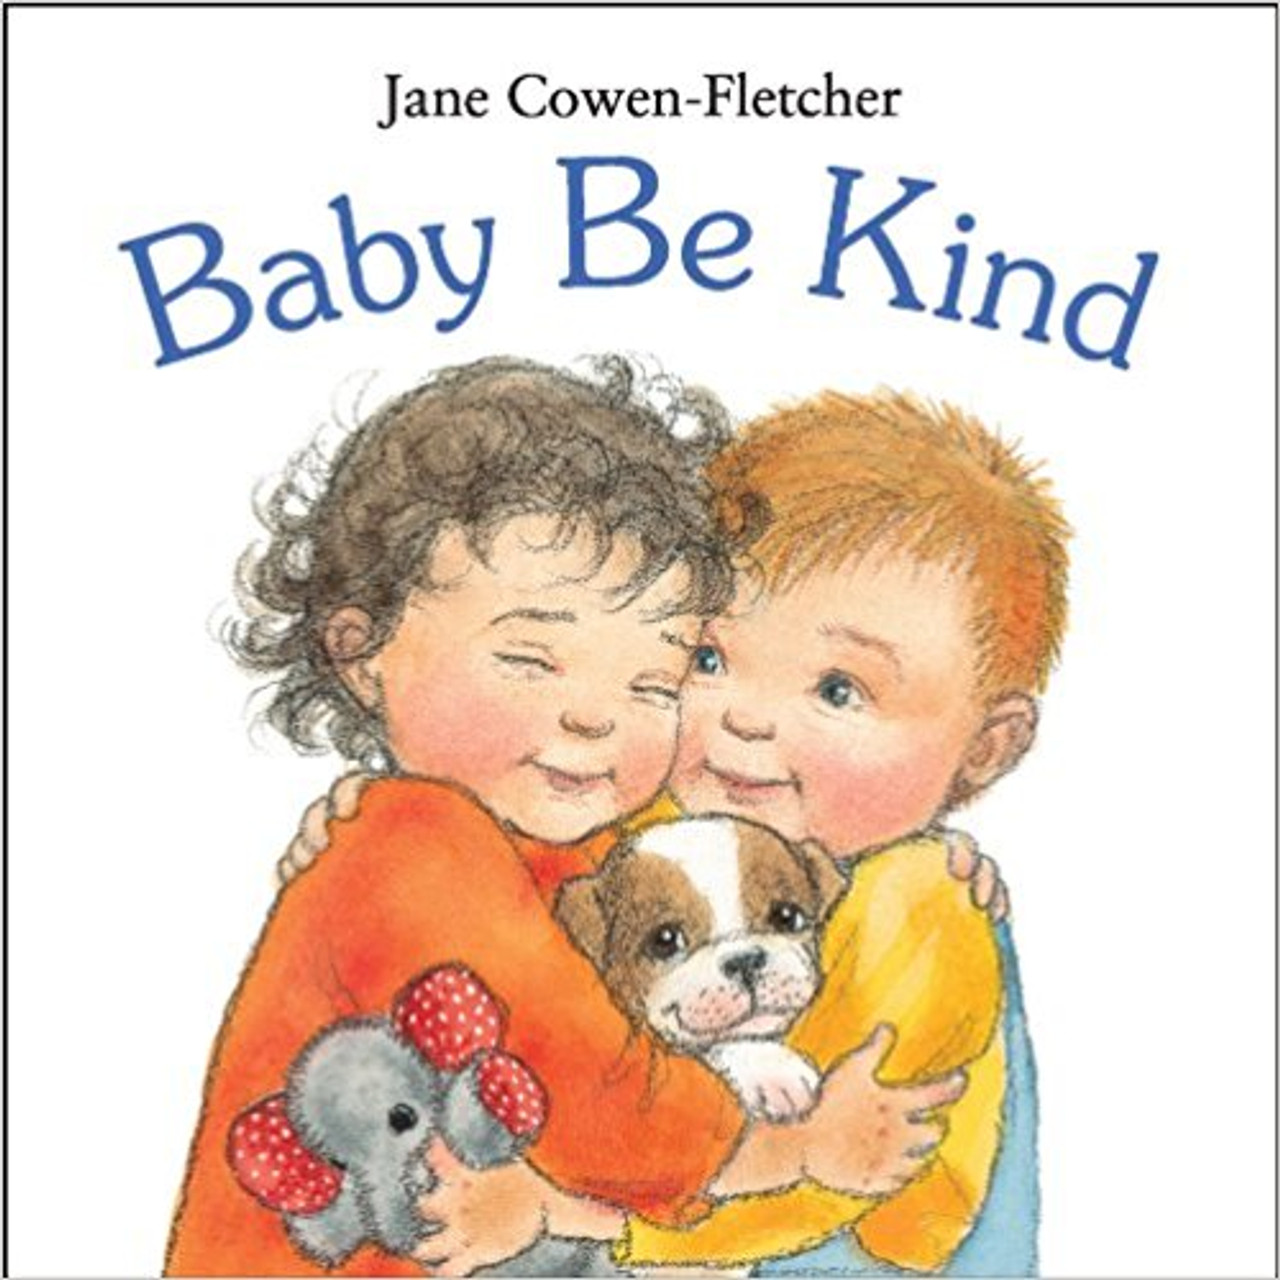 Easy-to-read, rhyming text provides examples of how to show kindness that even a baby will want to try. Endearing artwork makes the possibilities ever so appealing. Full color.